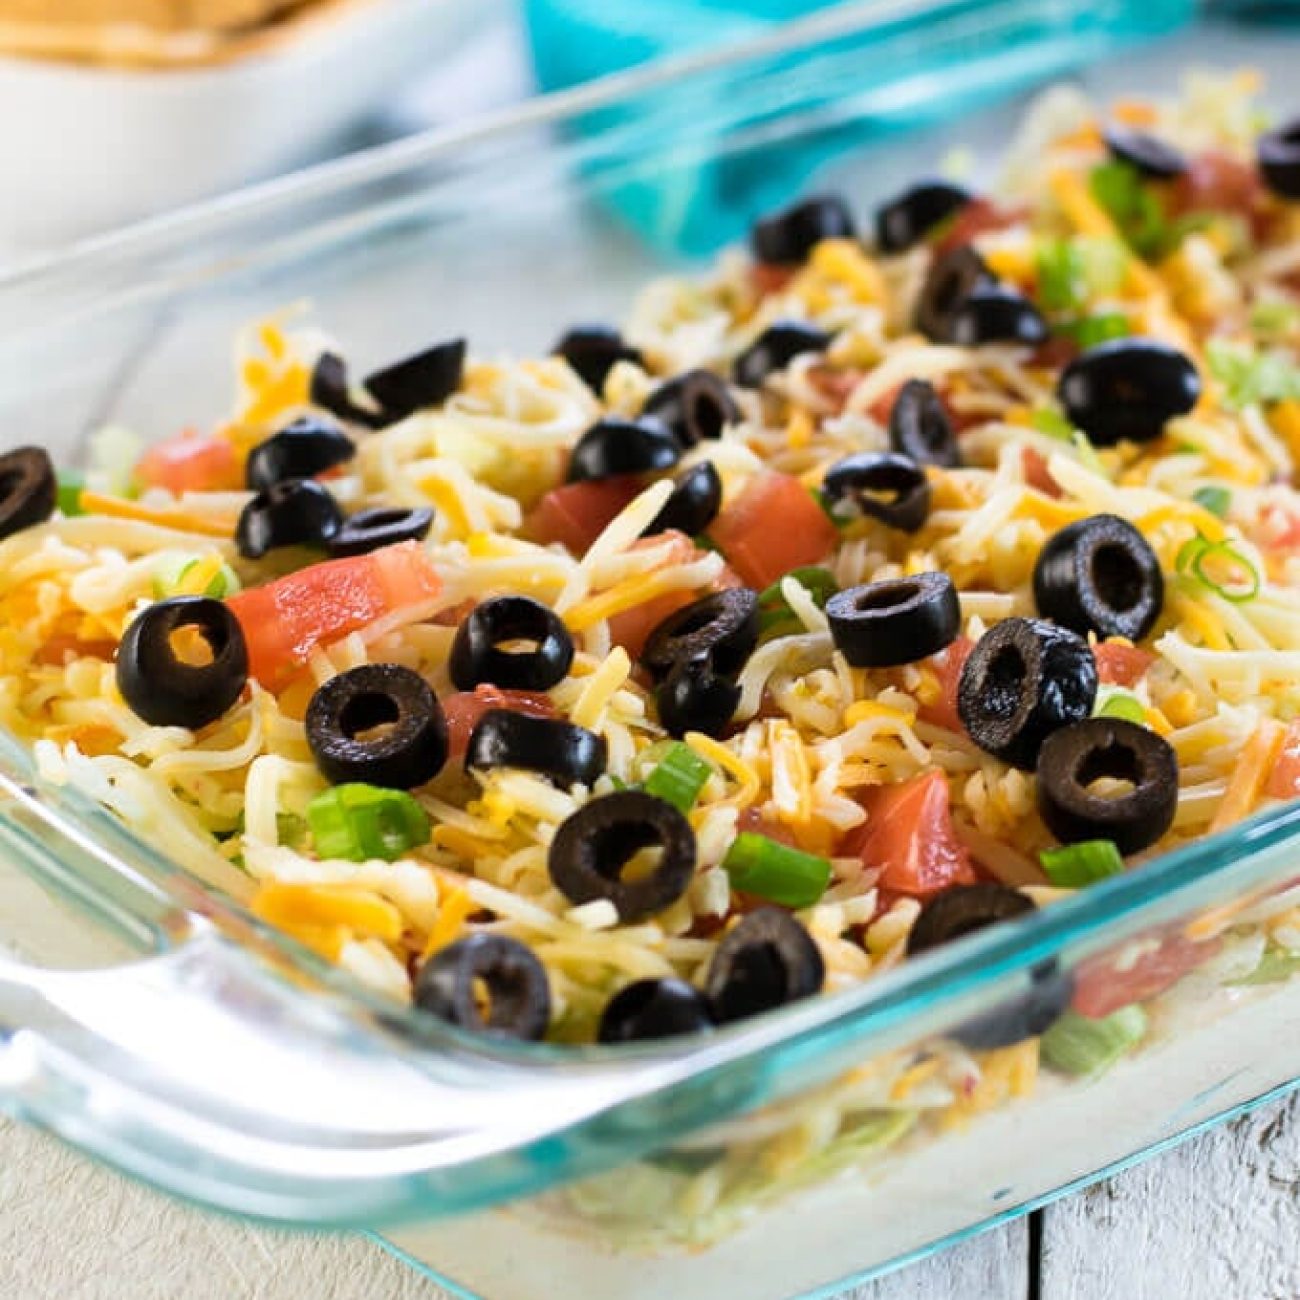 Awesome Taco Dip!